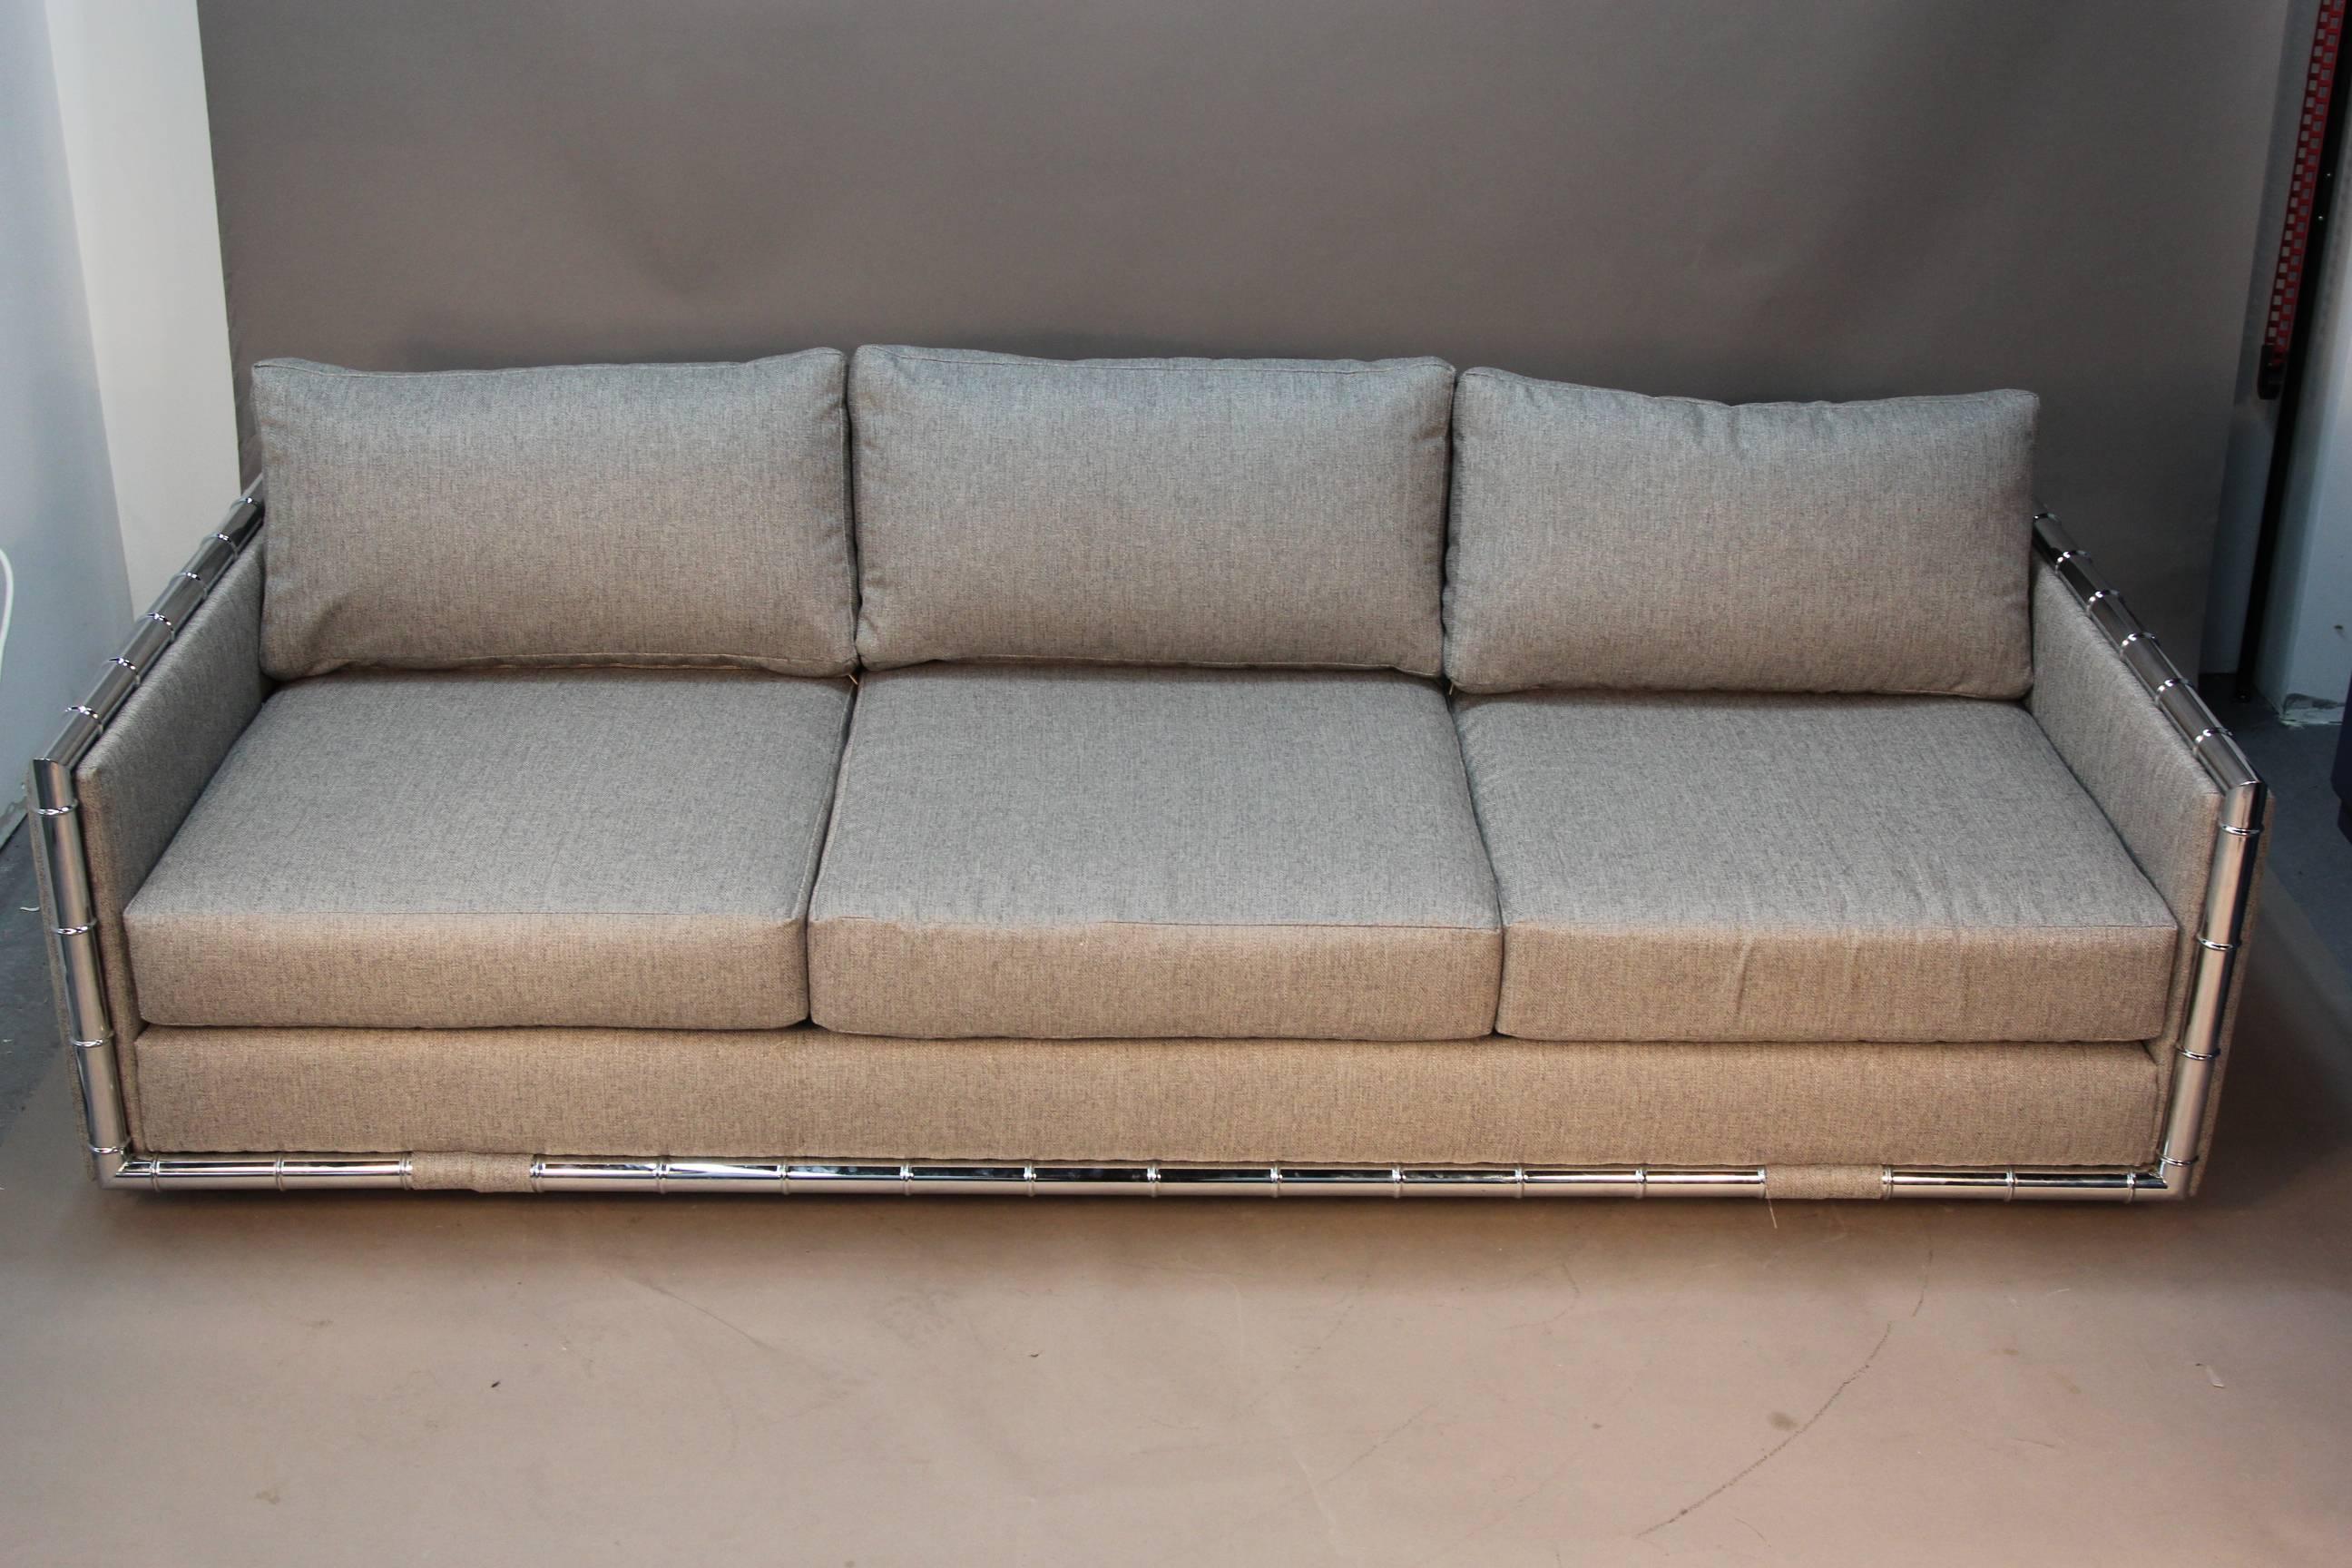 Adrian Pearsall for Craft Associates faux bamboo frame sofa. Newly re-upholstered in herringbone fabric. Matching loveseat also available. Very unique piece, amazing condition.